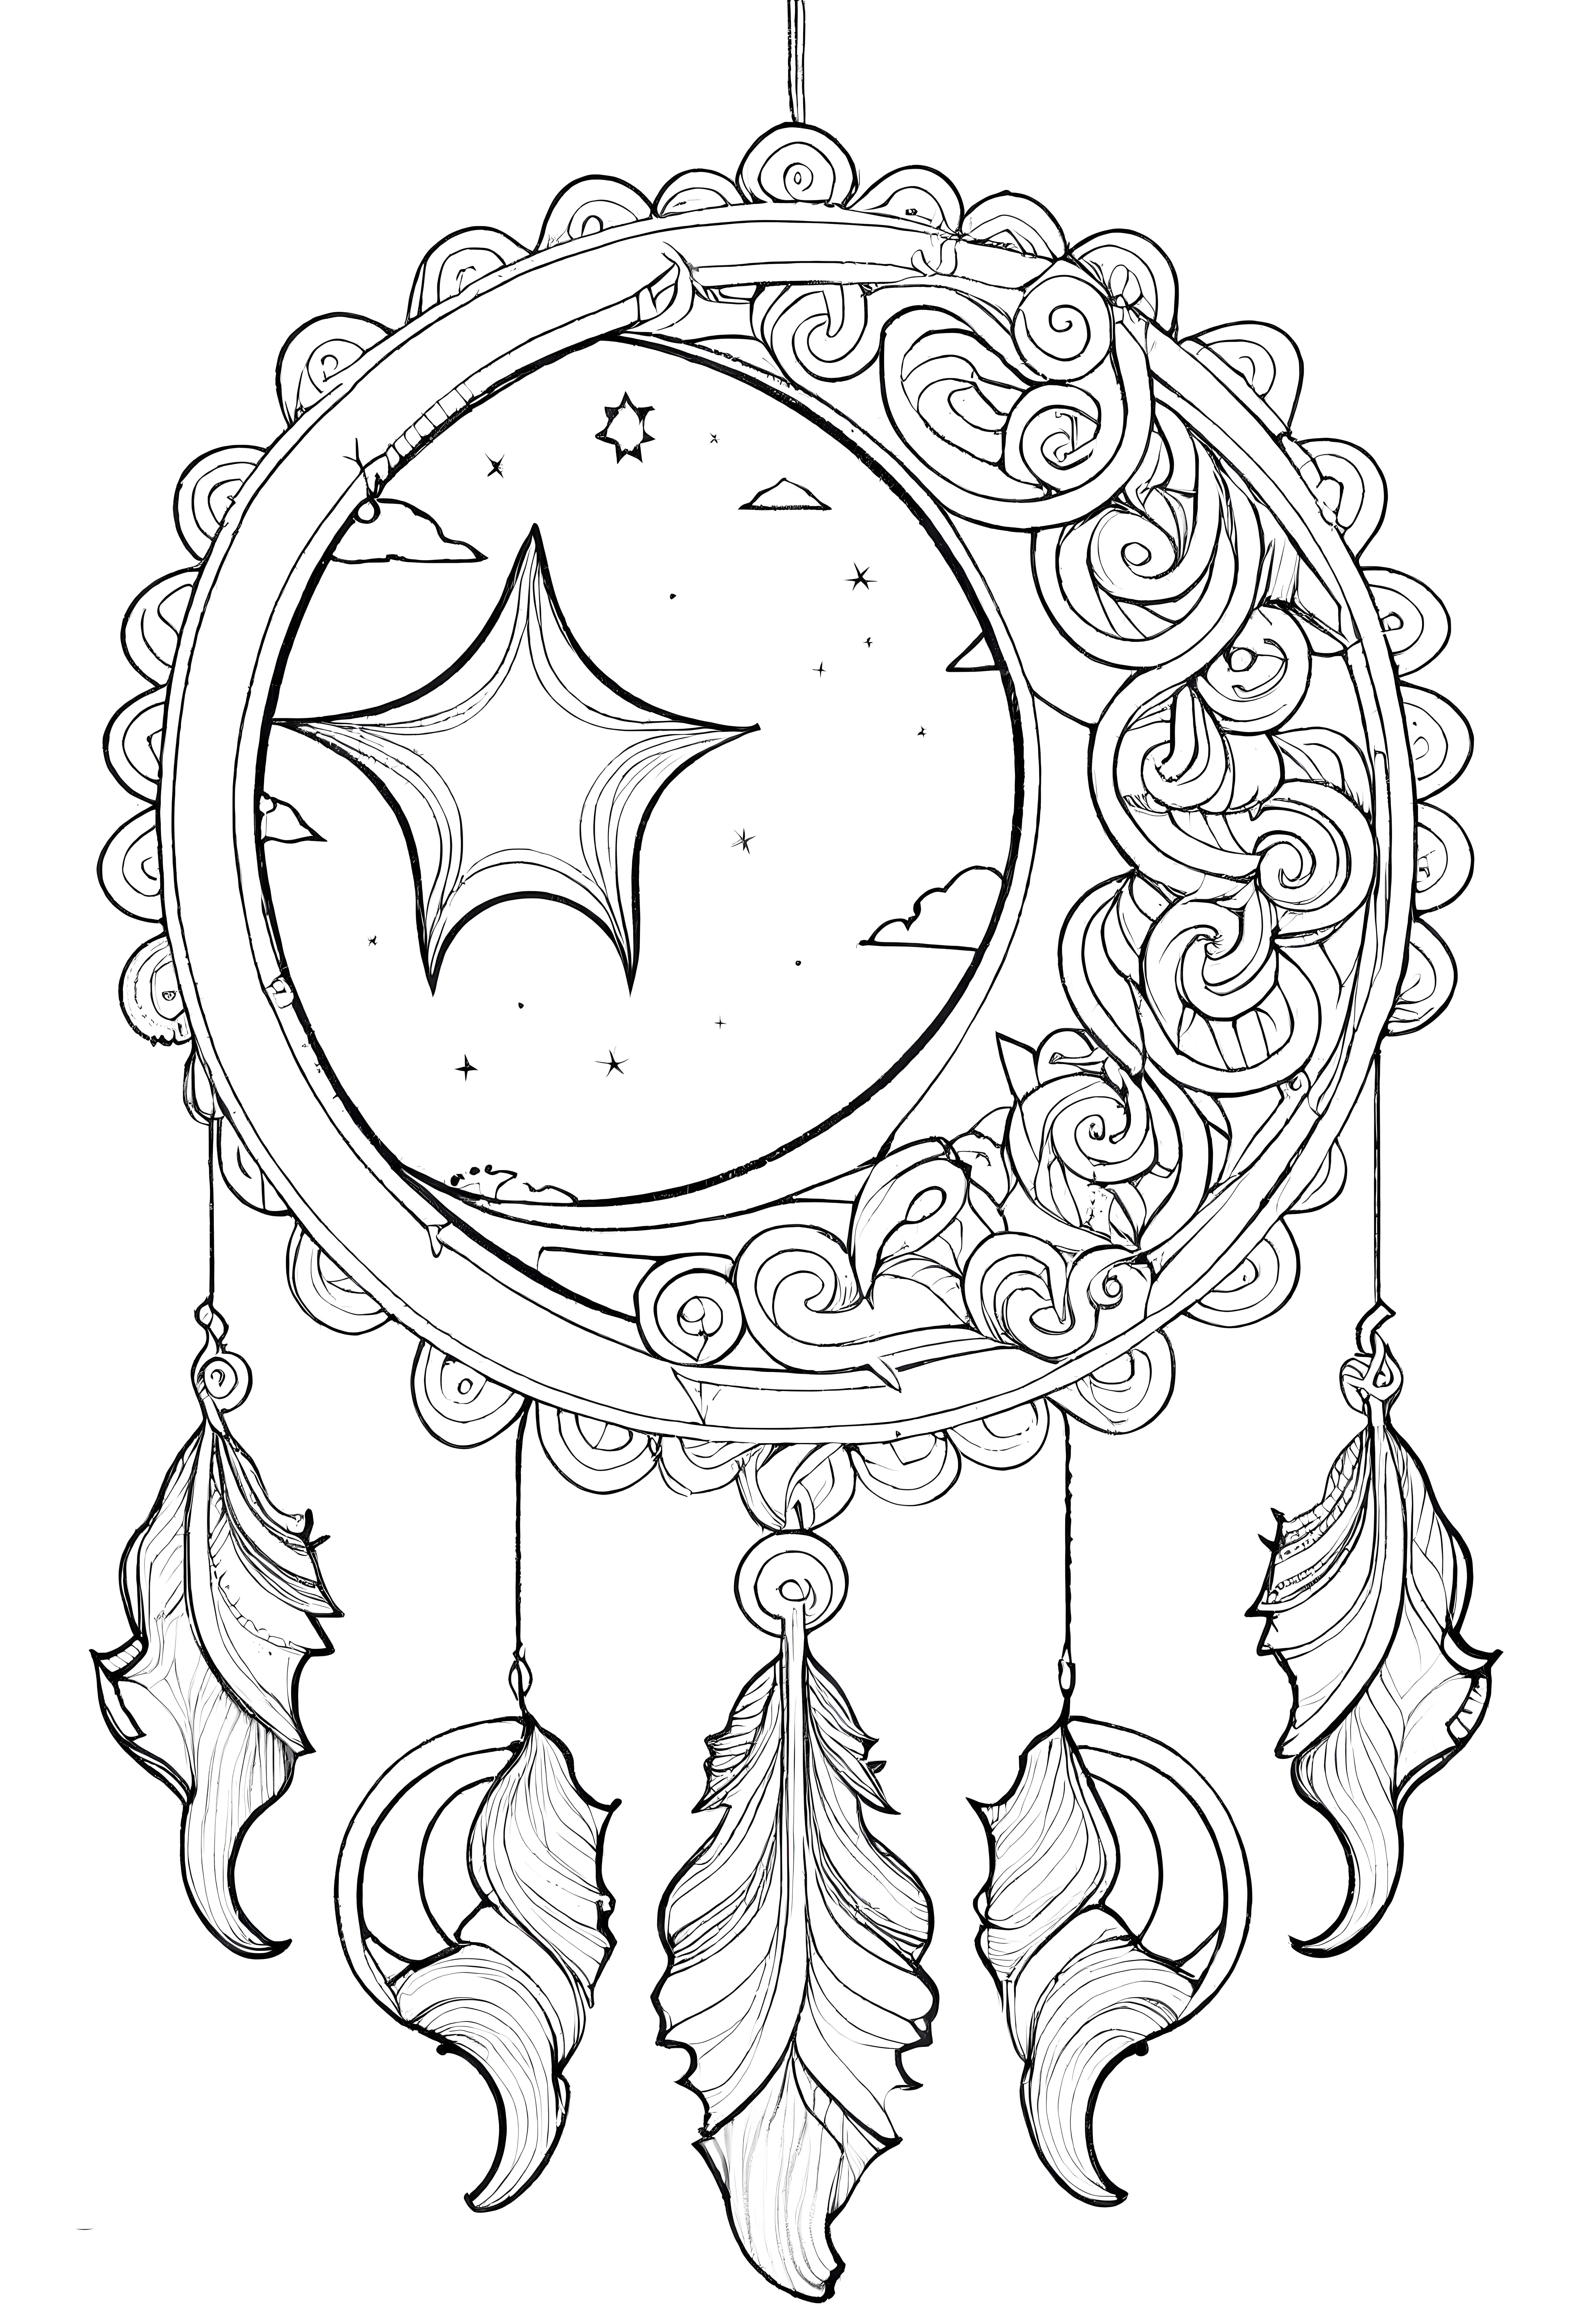 WITCH DREAMCATCHER COLORING BOOK: Relaxing Coloring Book for